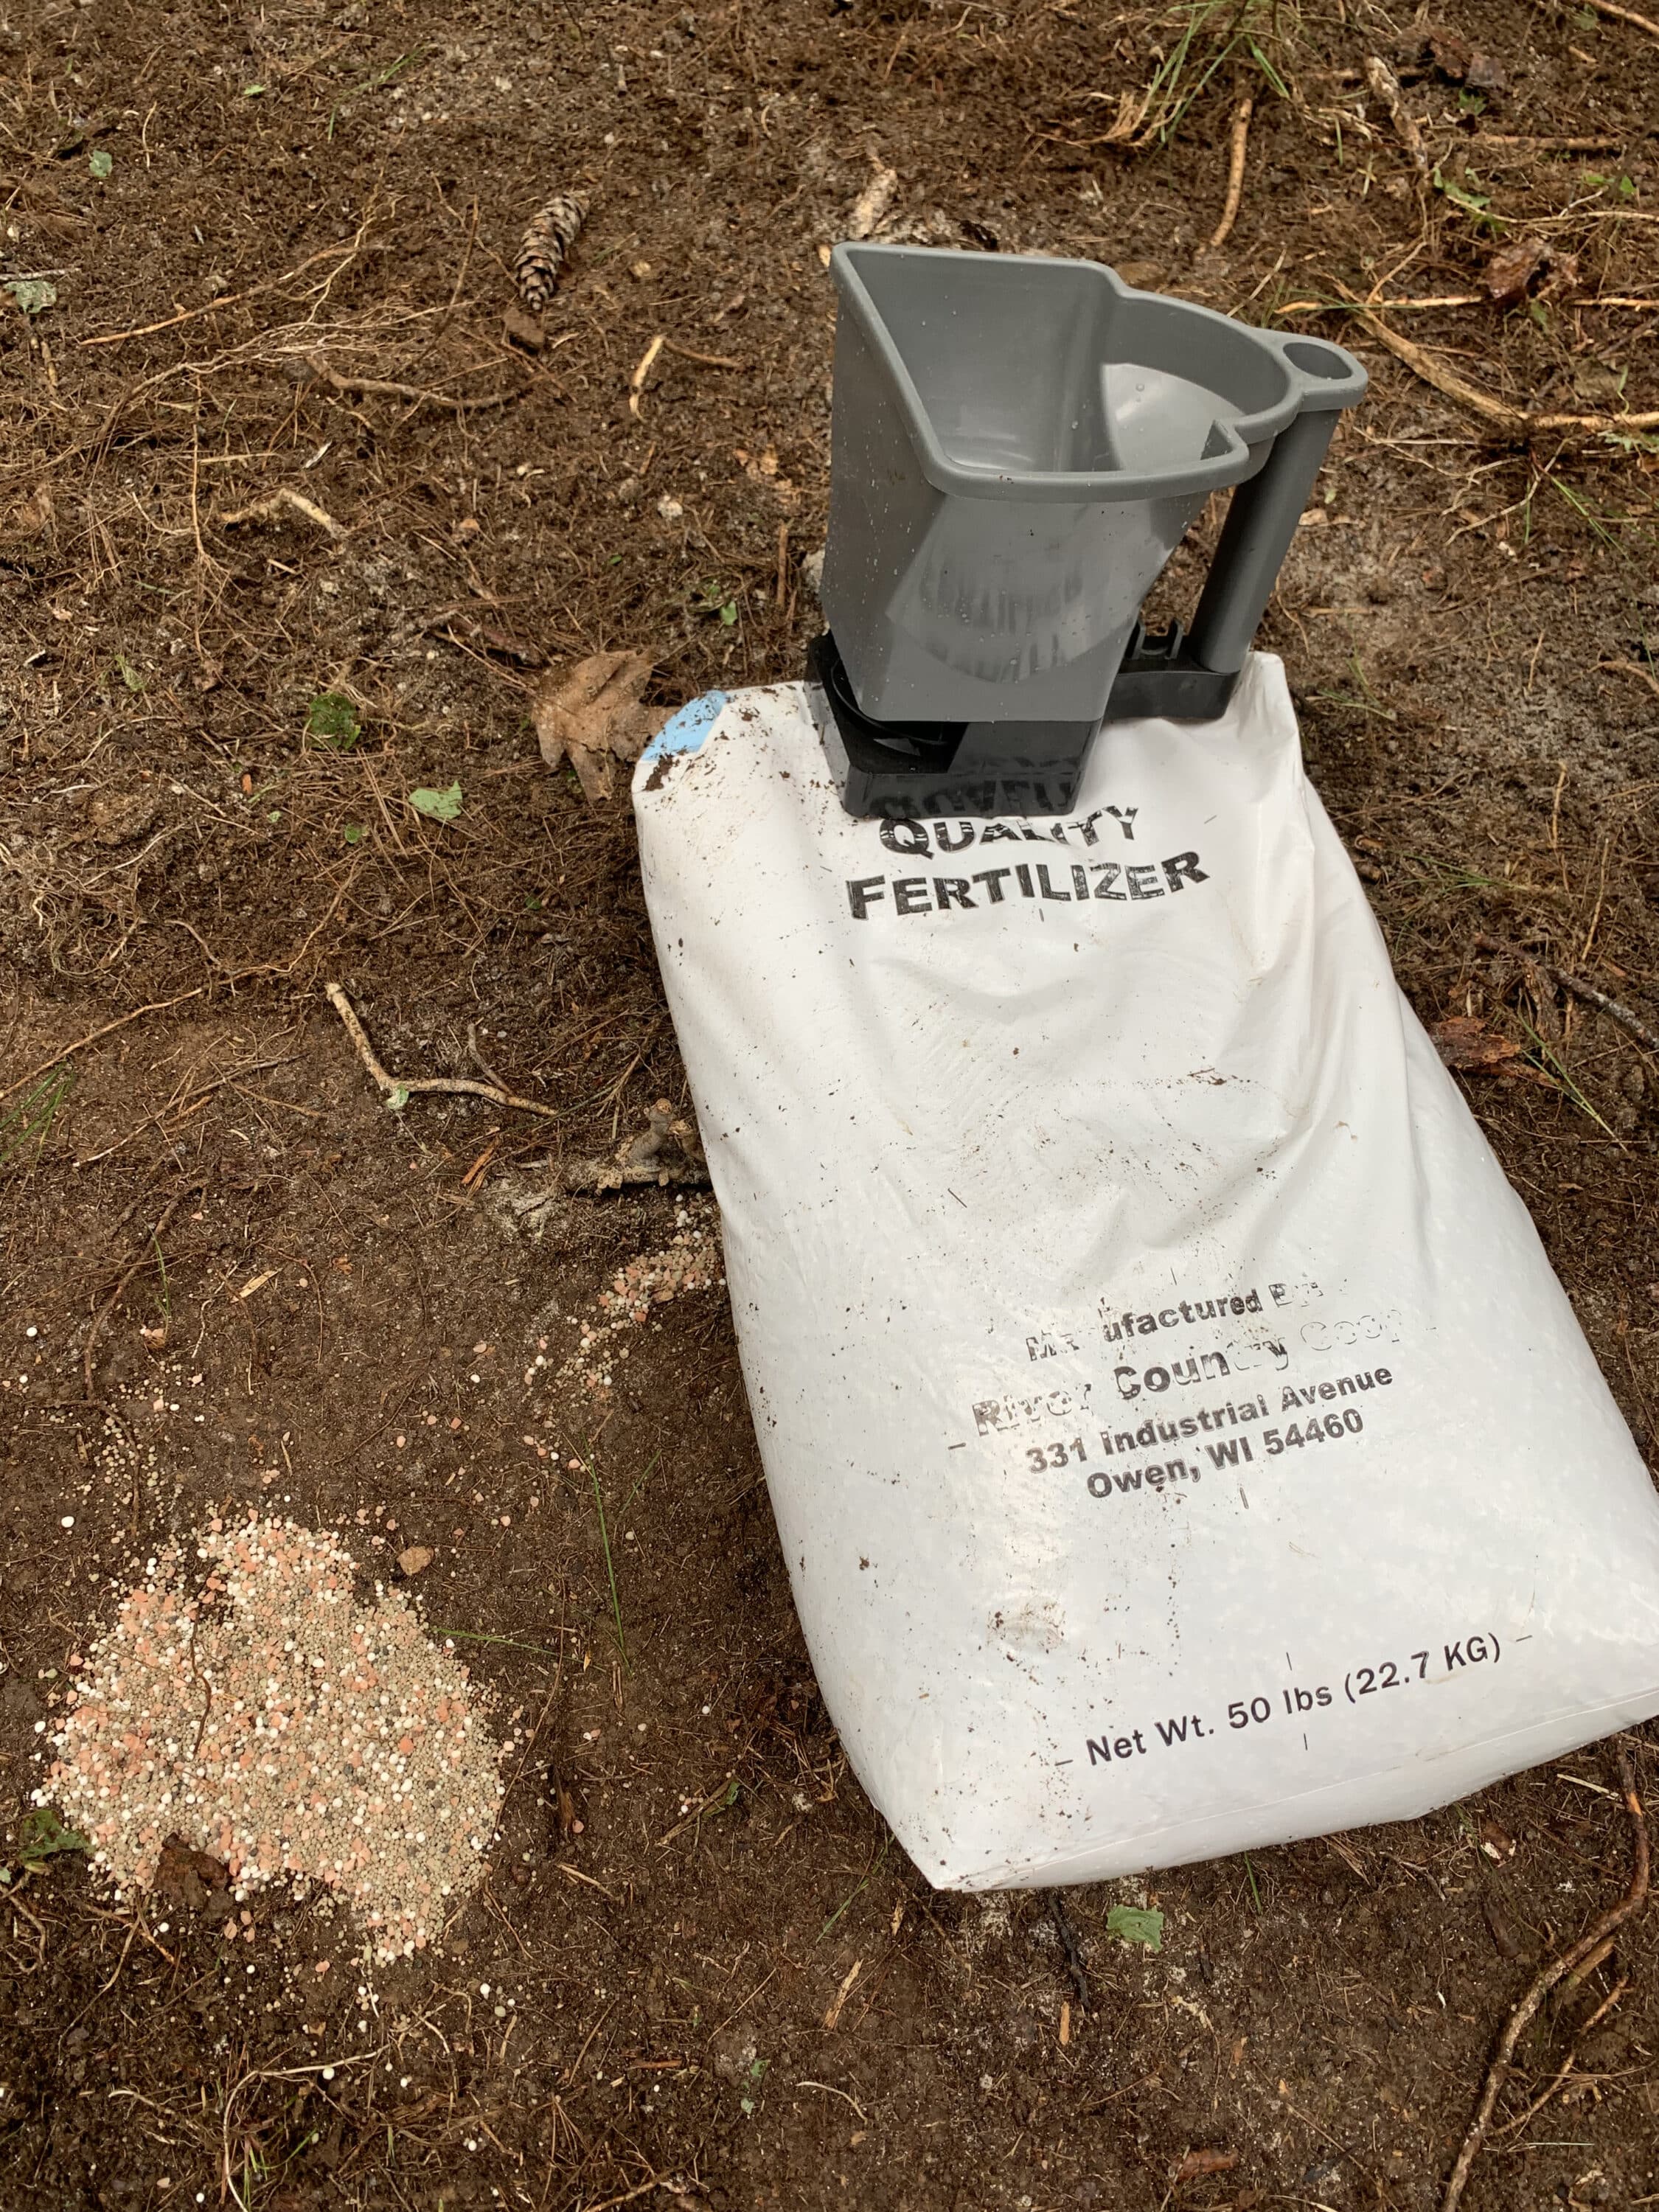 Before planting, broadcast the fertilizer recommended by your seed supplier for your specific plant-ing and then rake it into the soil prior to planting.